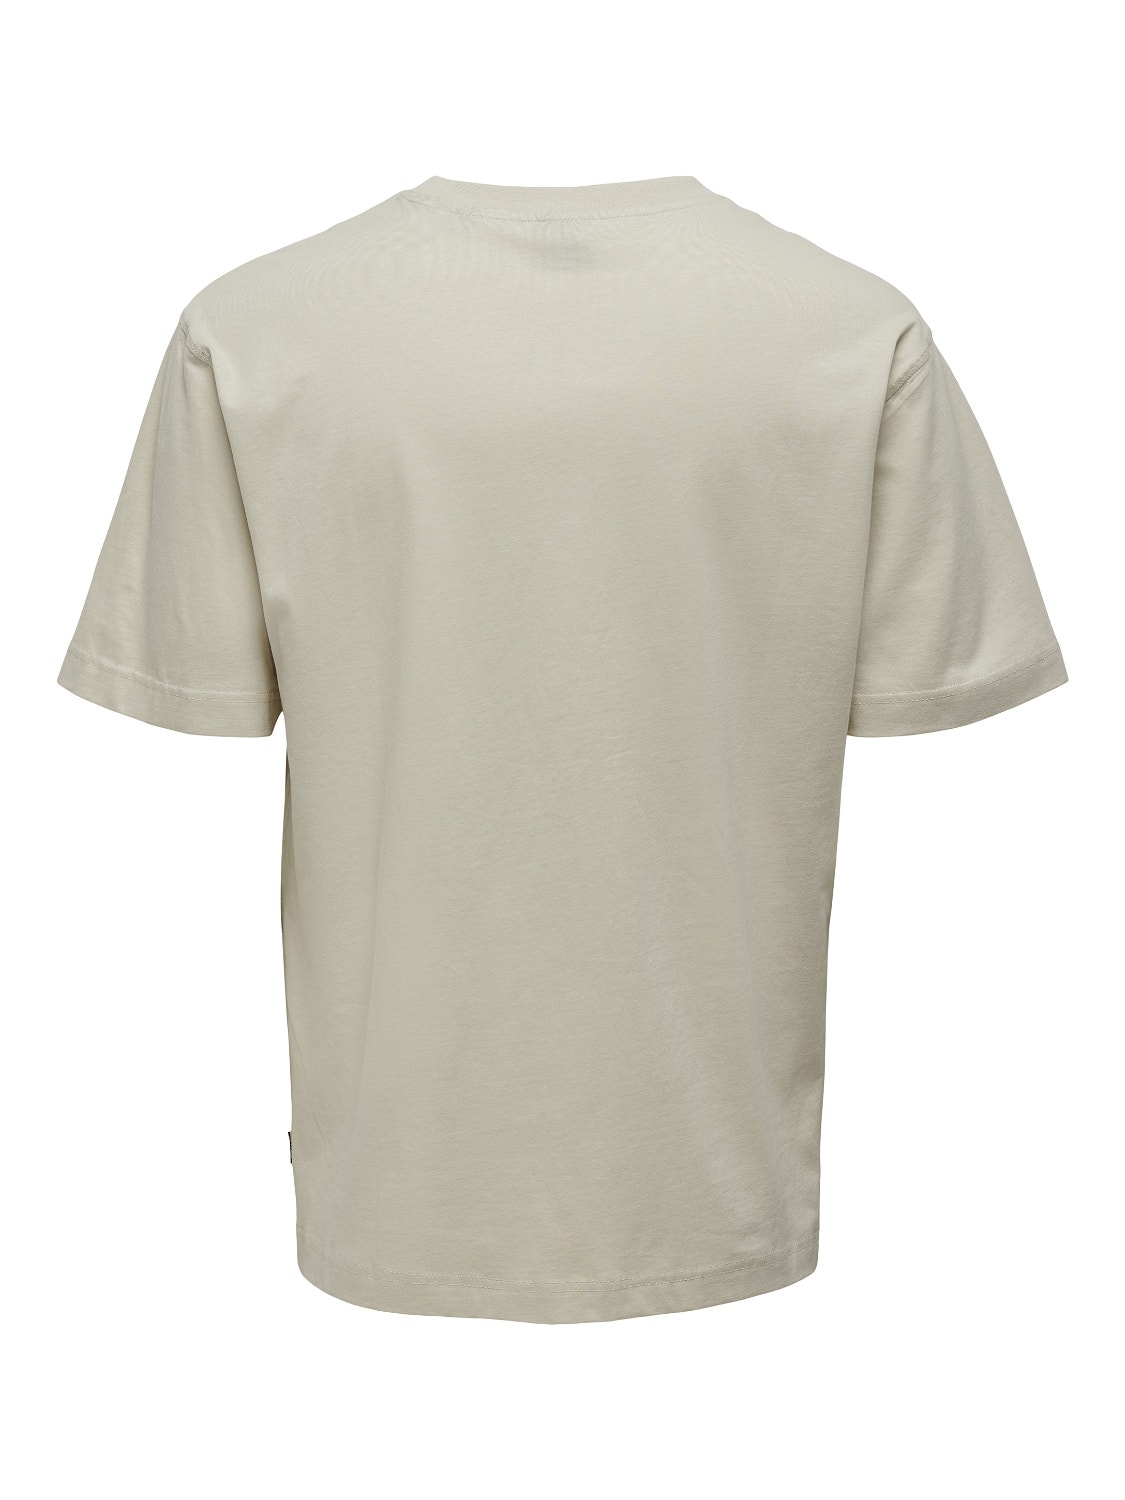 ONLY & SONS Oversized t-shirt med brystlomme -Pelican - 22021324